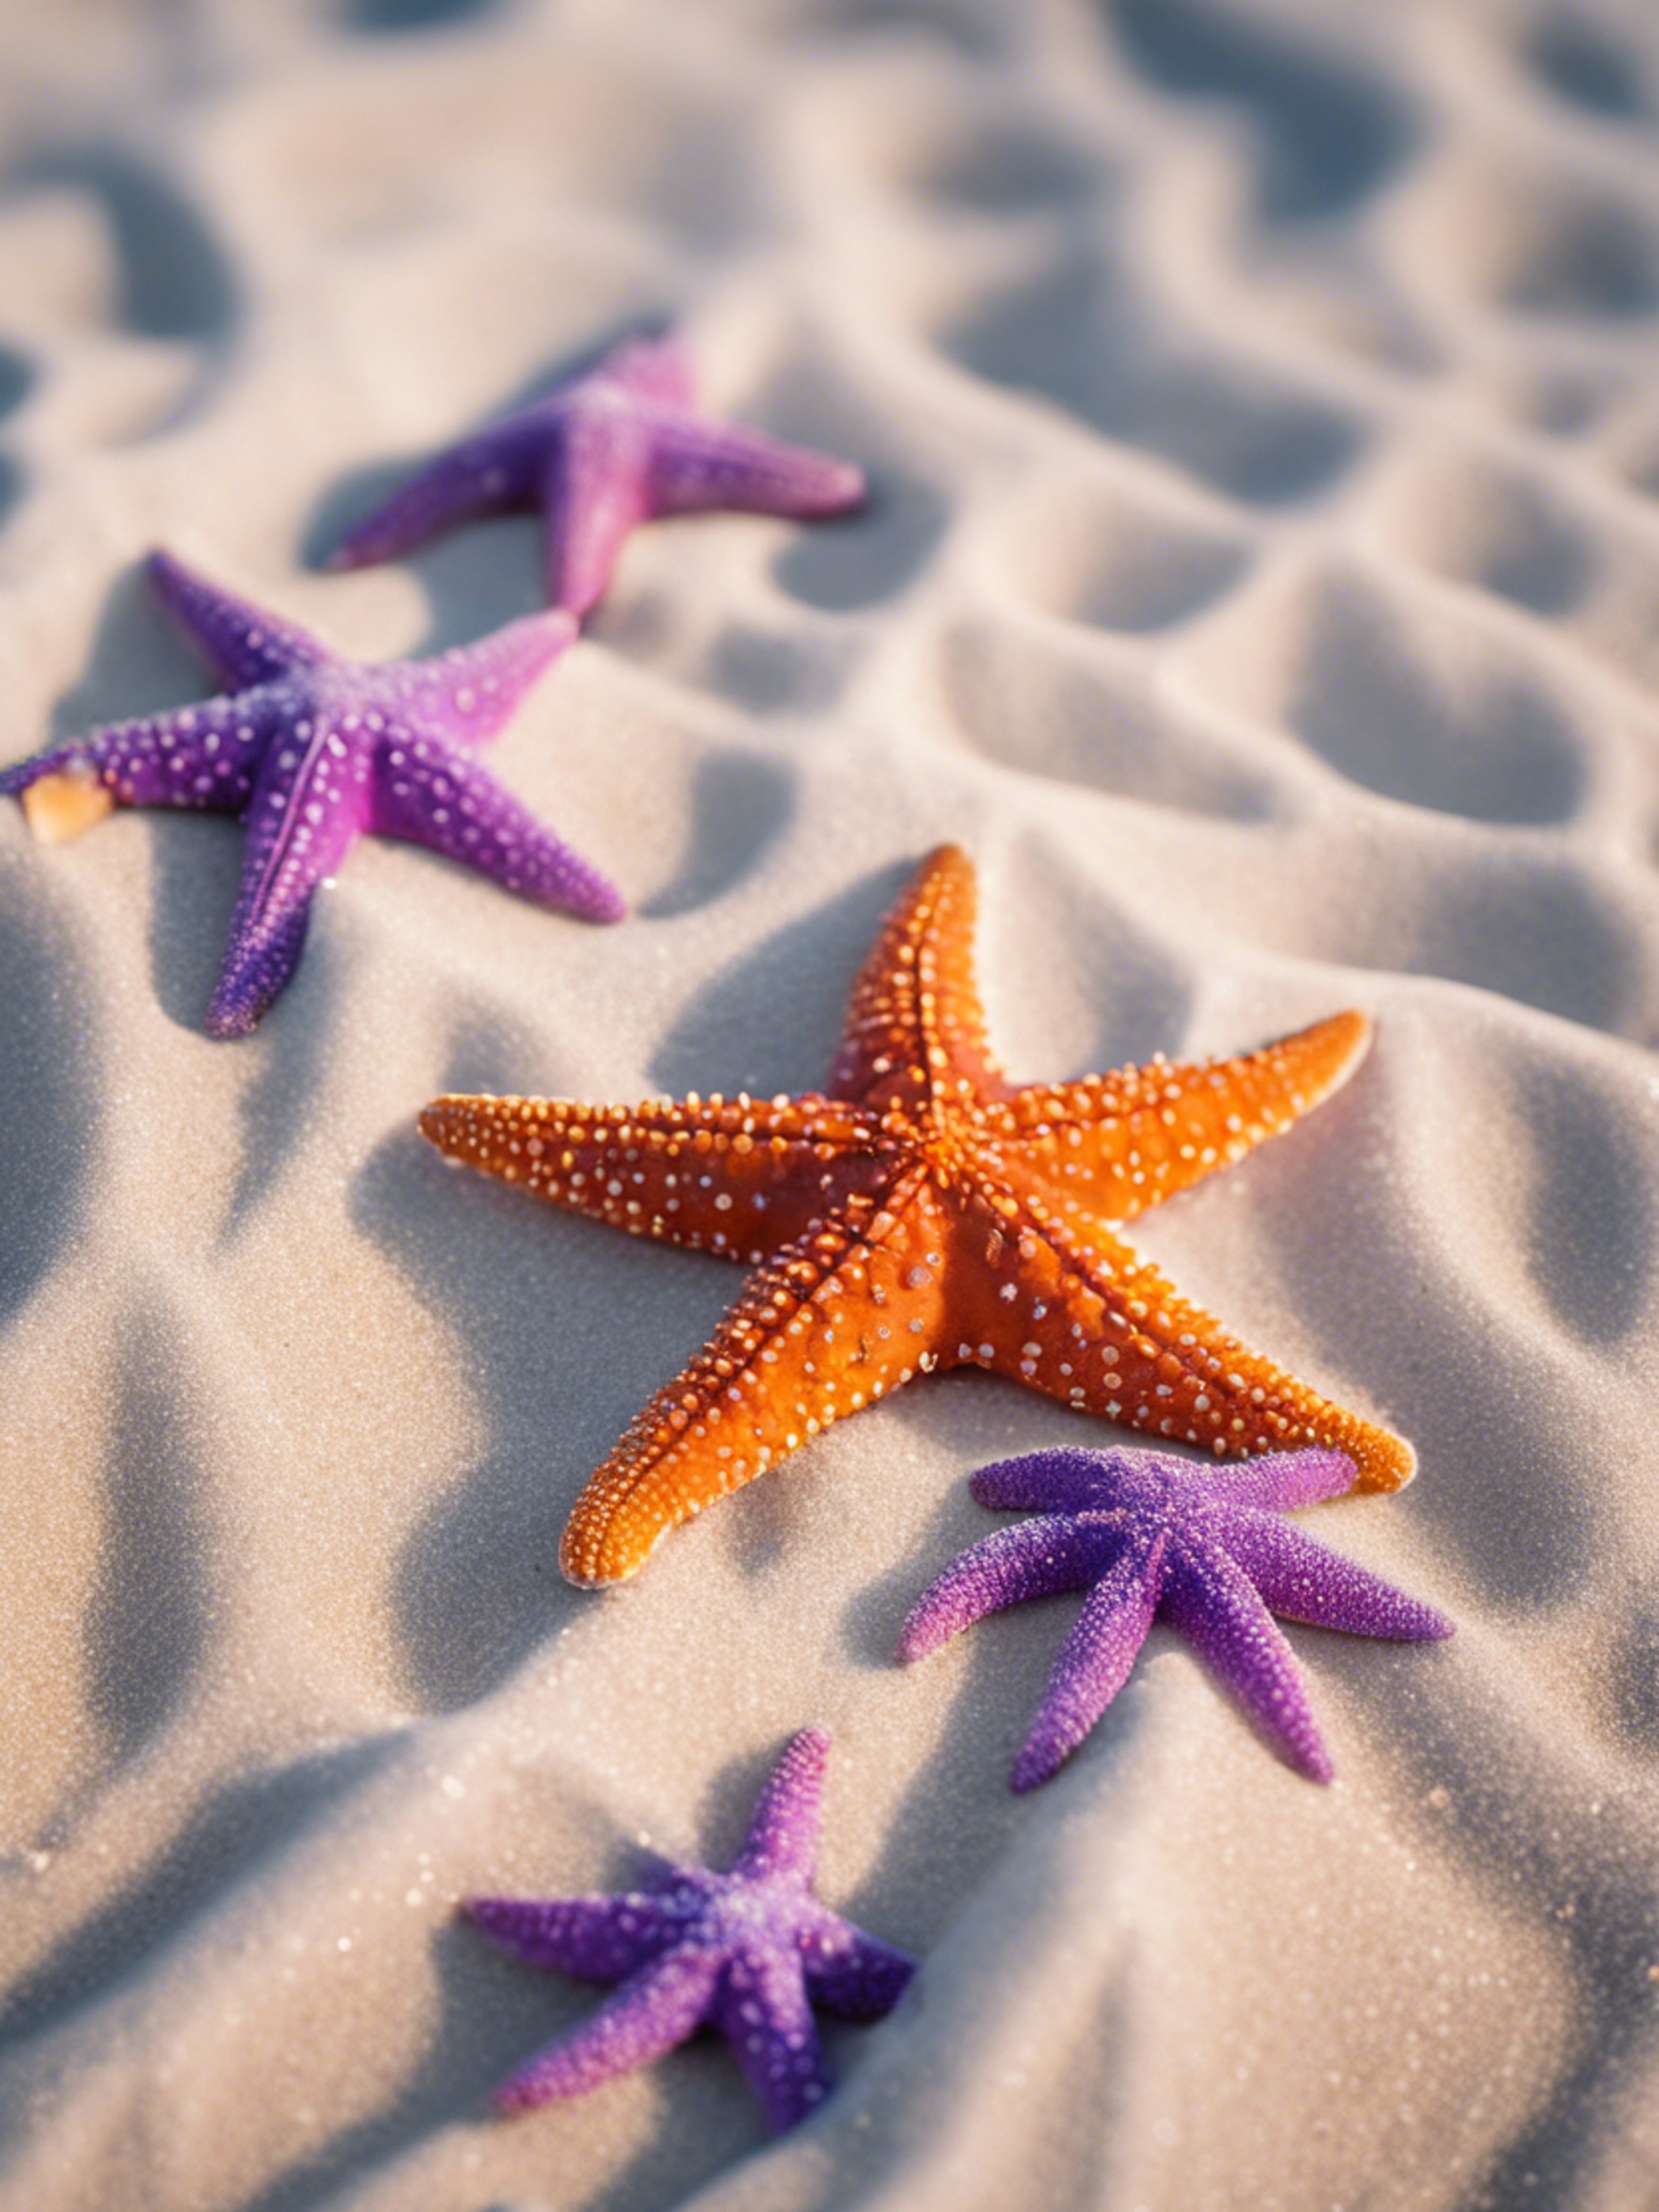 A group of starfish, some featured in cool purple and others in brilliant orange, nestled in white beach sands.壁紙[a04168020cdc43059542]